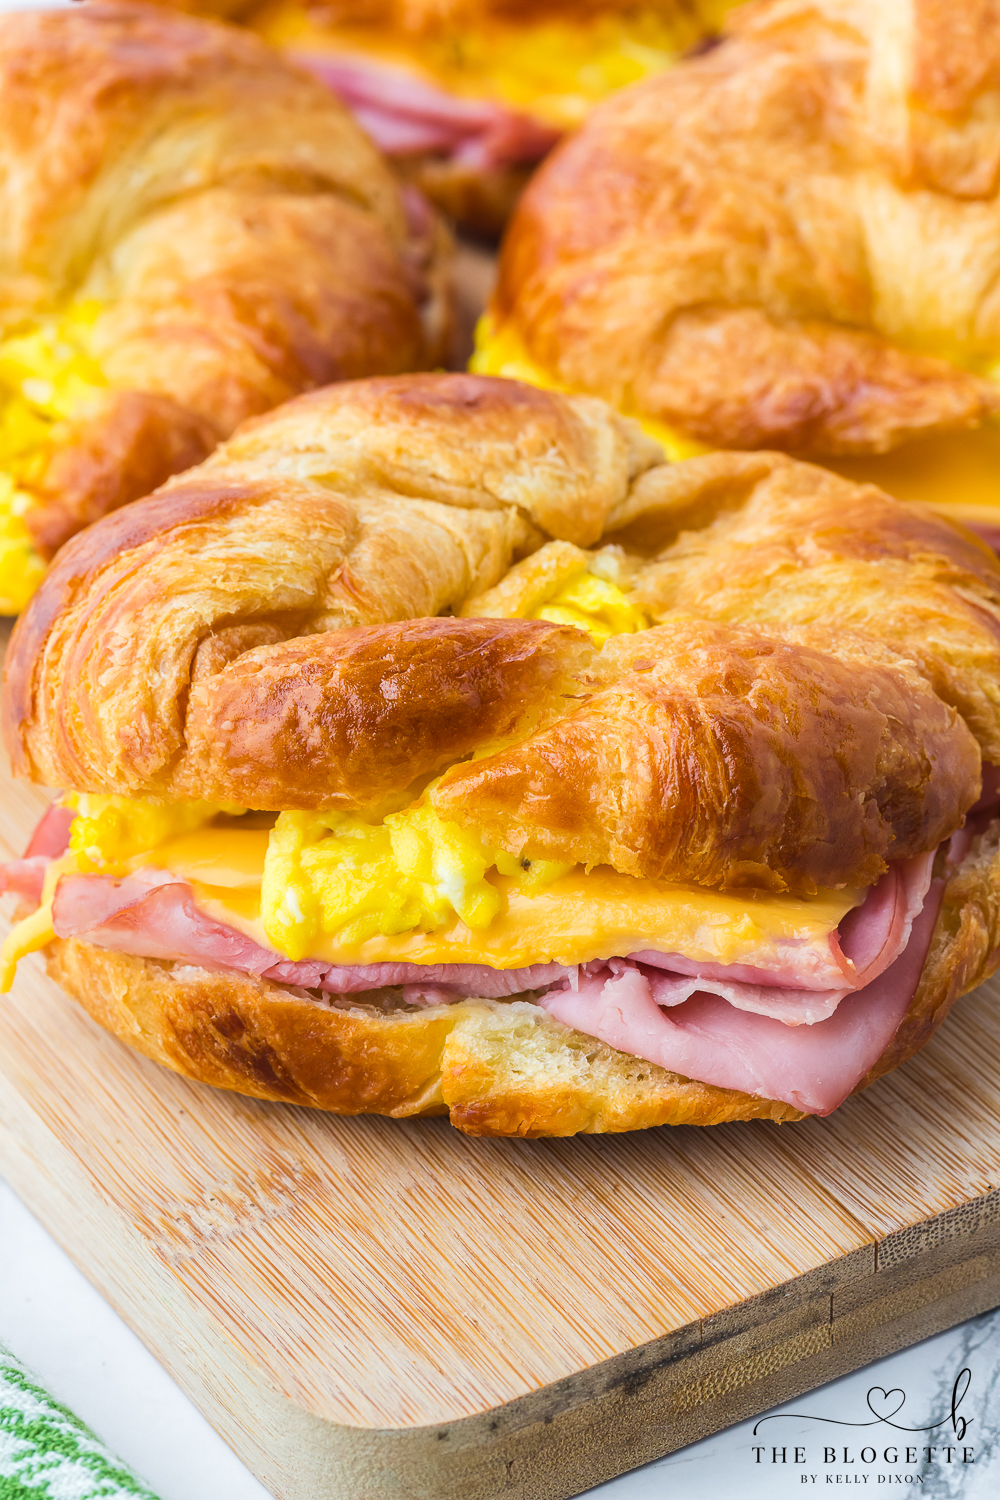 Croissant Breakfast Sandwiches are the ultimate breakfast comfort! Buttery flakey bread stuffed with eggs, ham, and melted cheese.